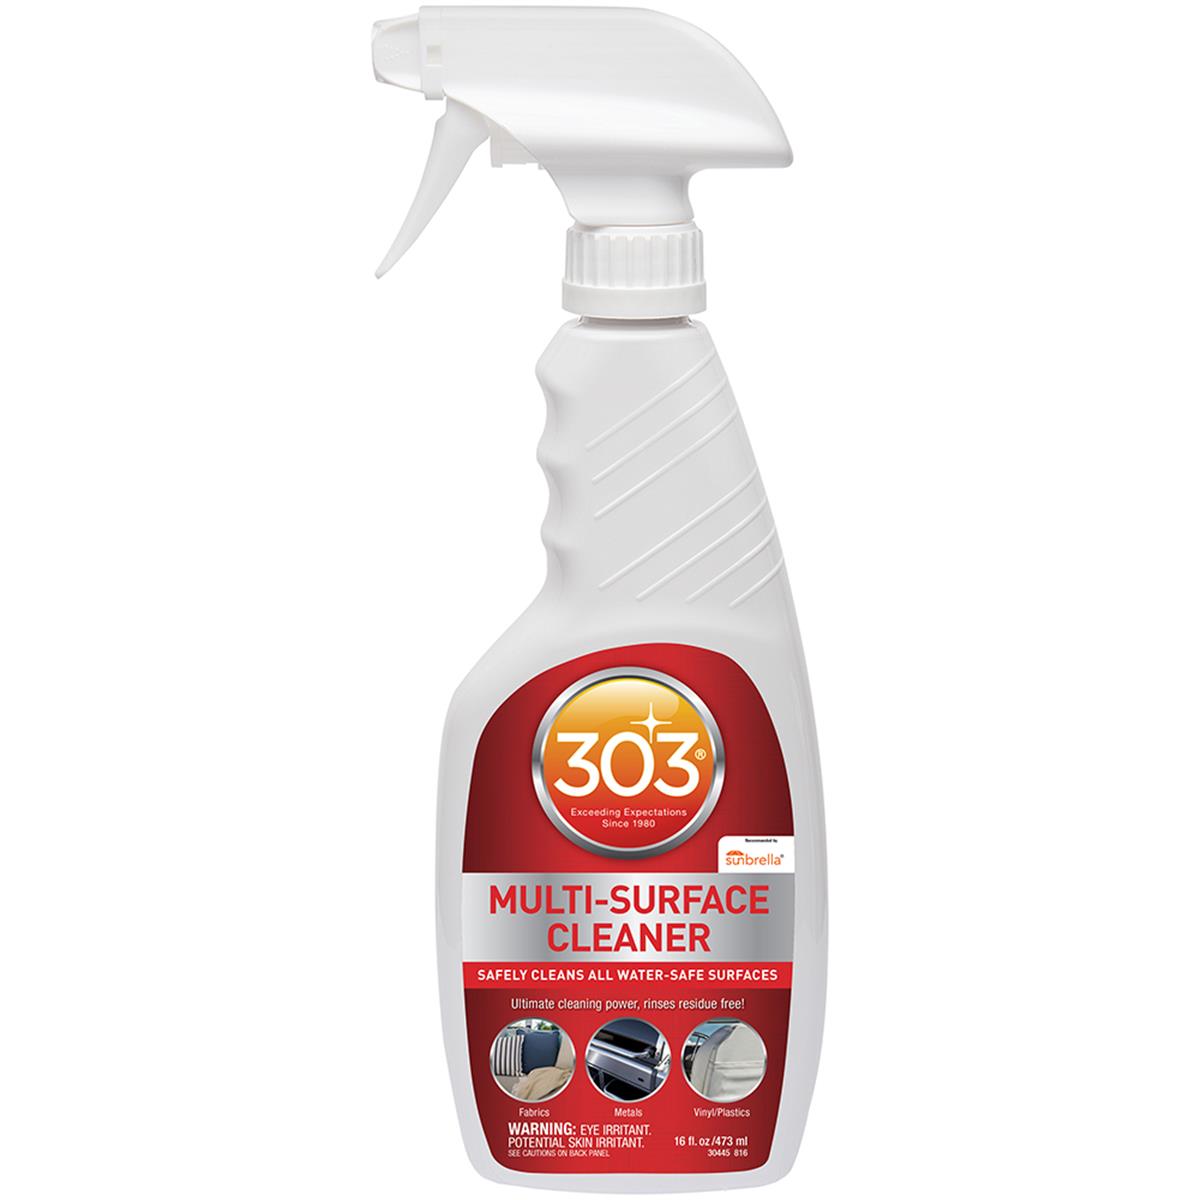 Picture of 303 30445 Multi-Surface Cleaner with Trigger Sprayer - 16 oz